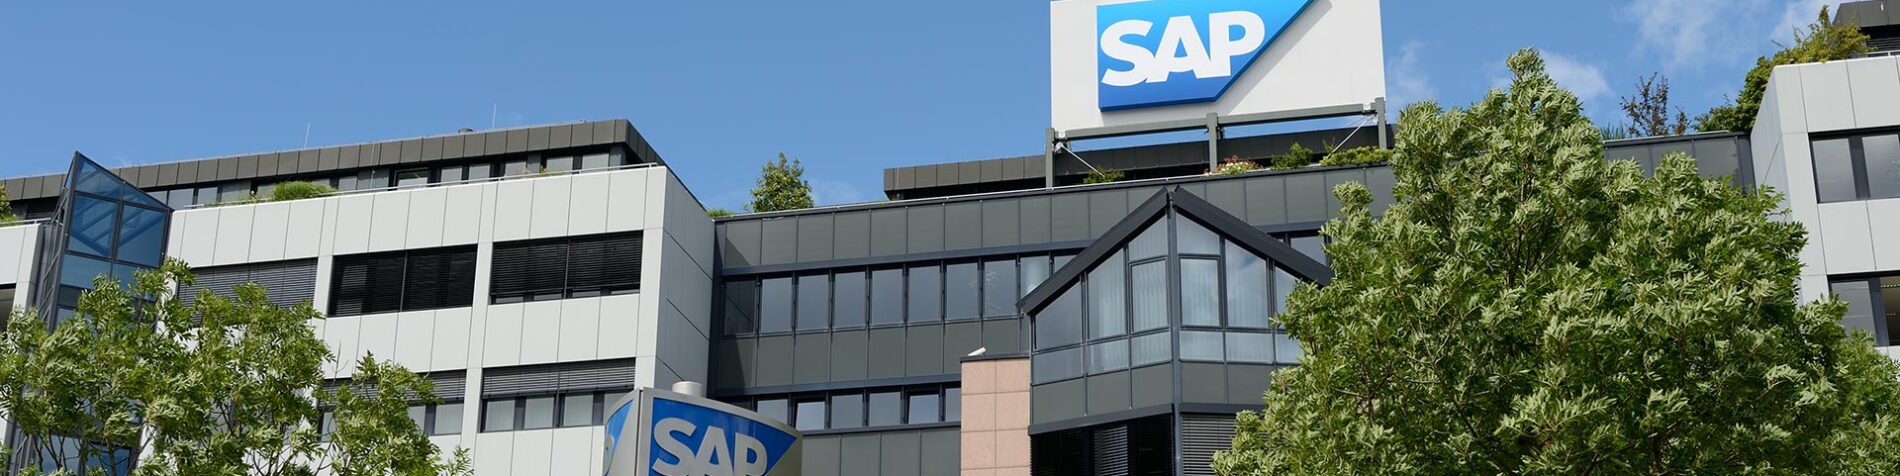 SAP Names Christian Klein to Executive Board to Lead Global Business Operations